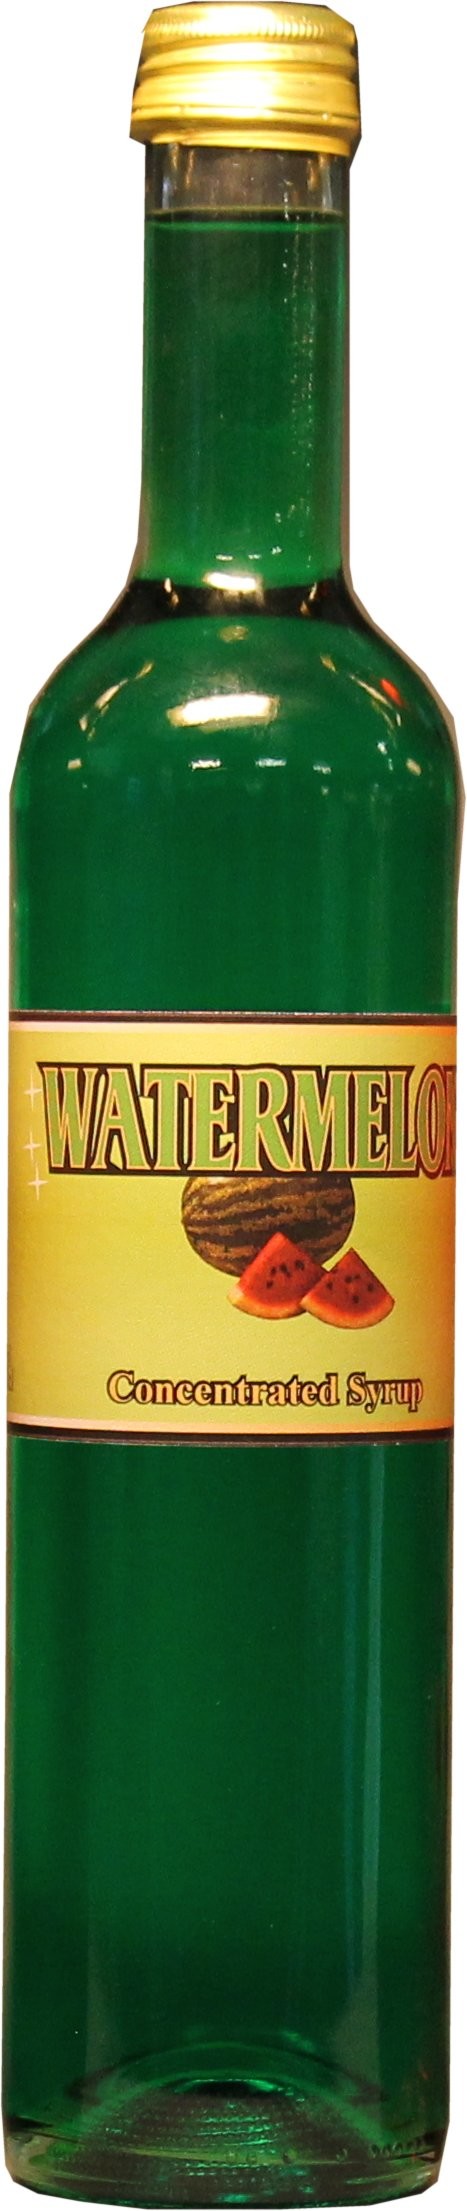 Vattenmelon sirap / Water melon syrup.